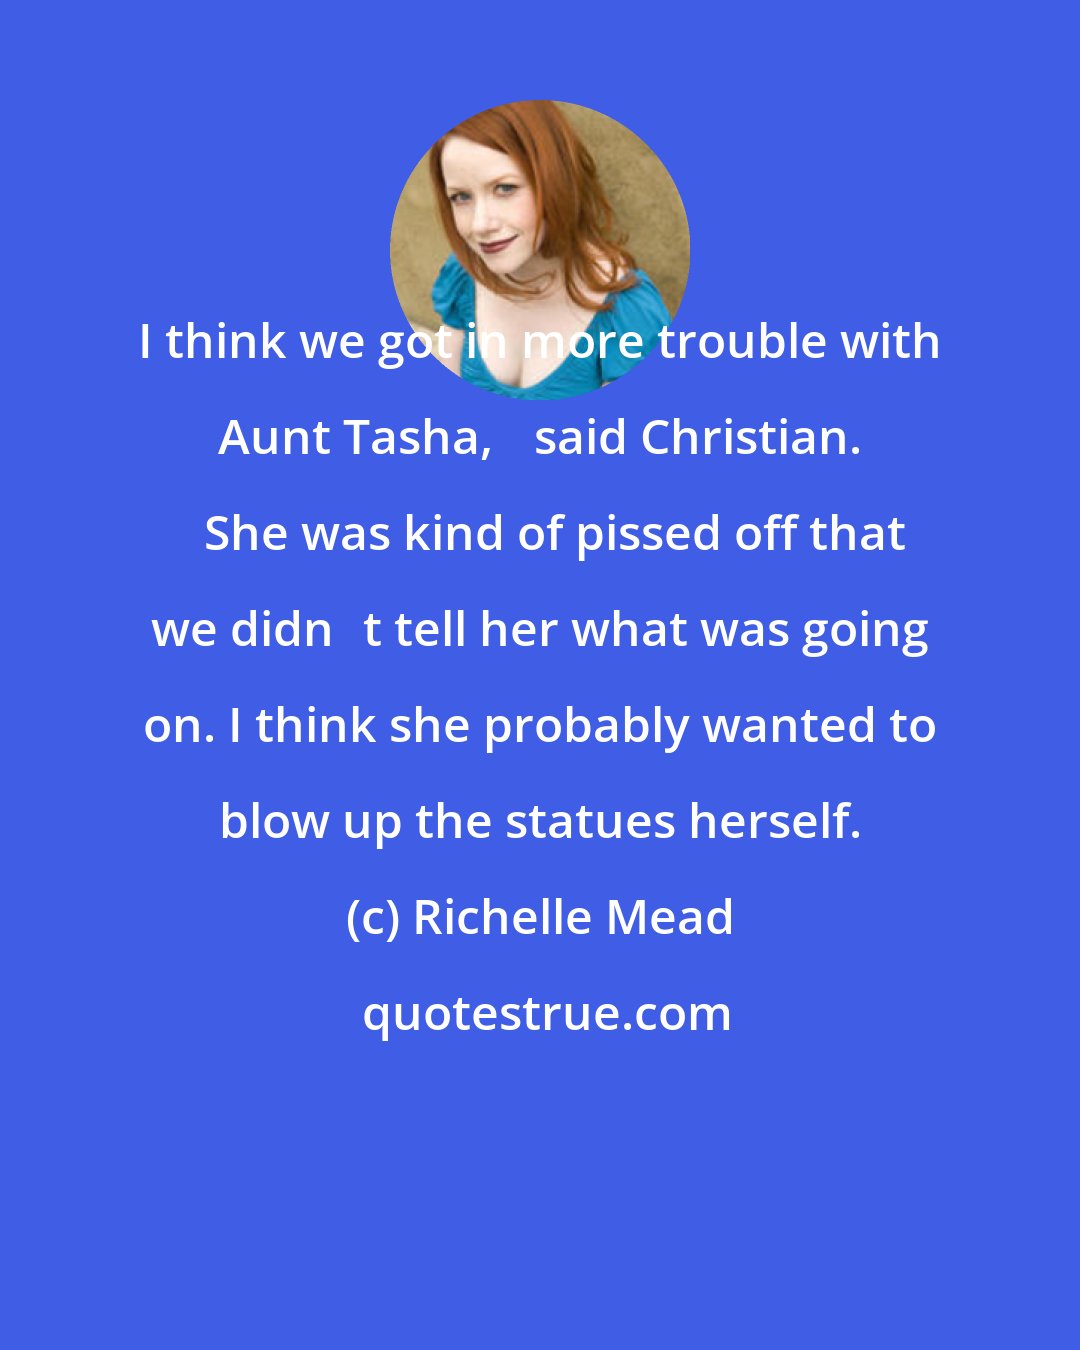 Richelle Mead: I think we got in more trouble with Aunt Tasha,ʺ said Christian. ʺShe was kind of pissed off that we didnʹt tell her what was going on. I think she probably wanted to blow up the statues herself.